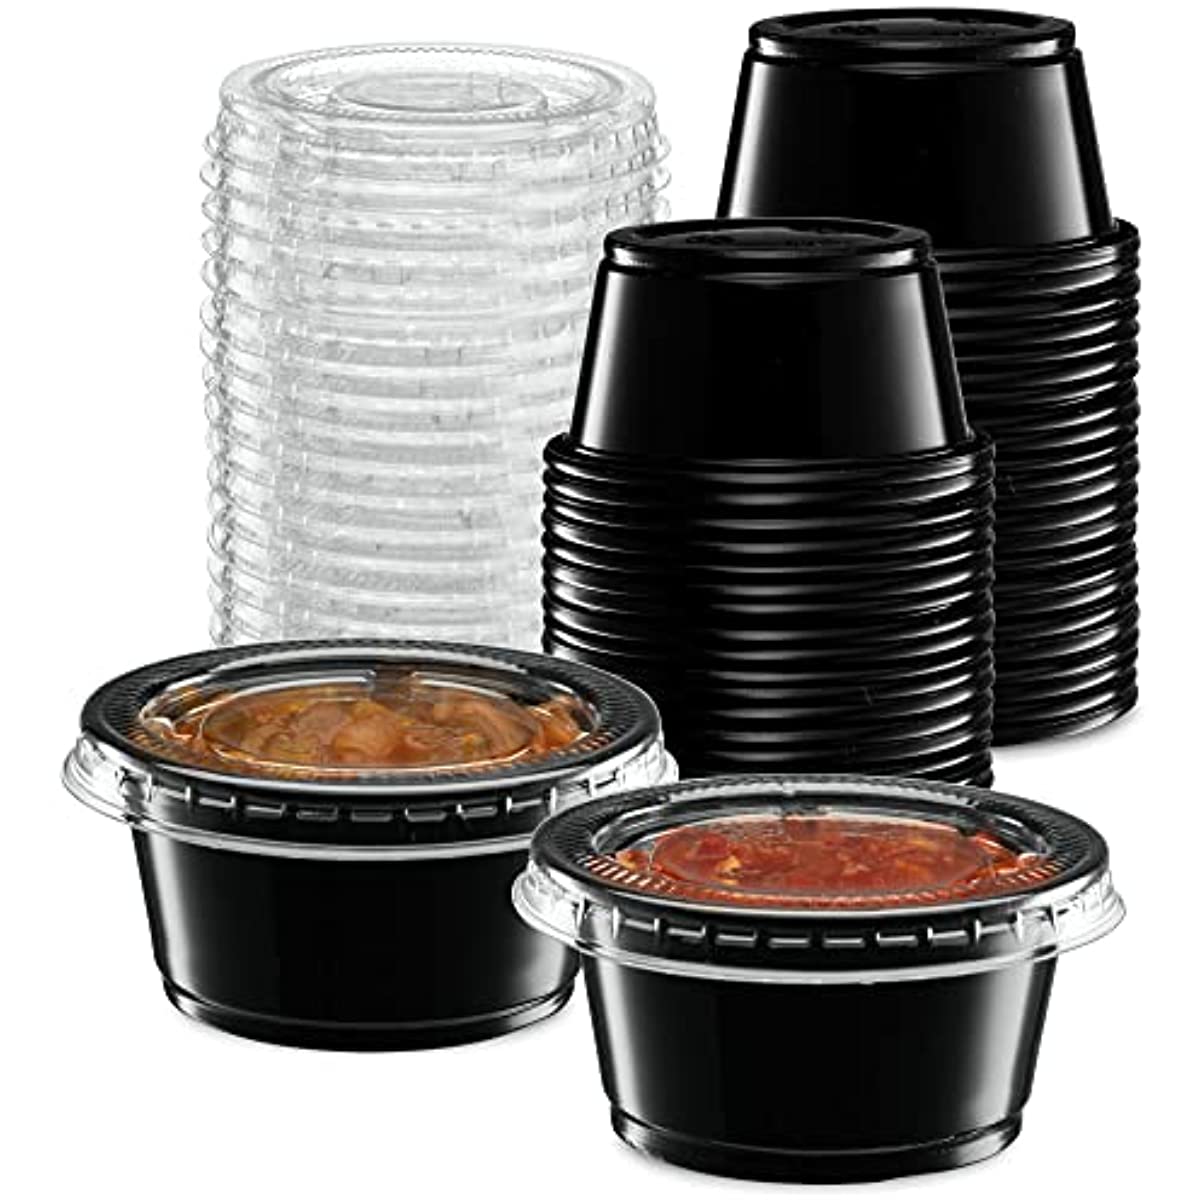 Yocup 16 oz Black Microwavable Plastic Bowl With Clear Lid Combo - 1 case  (300 set)